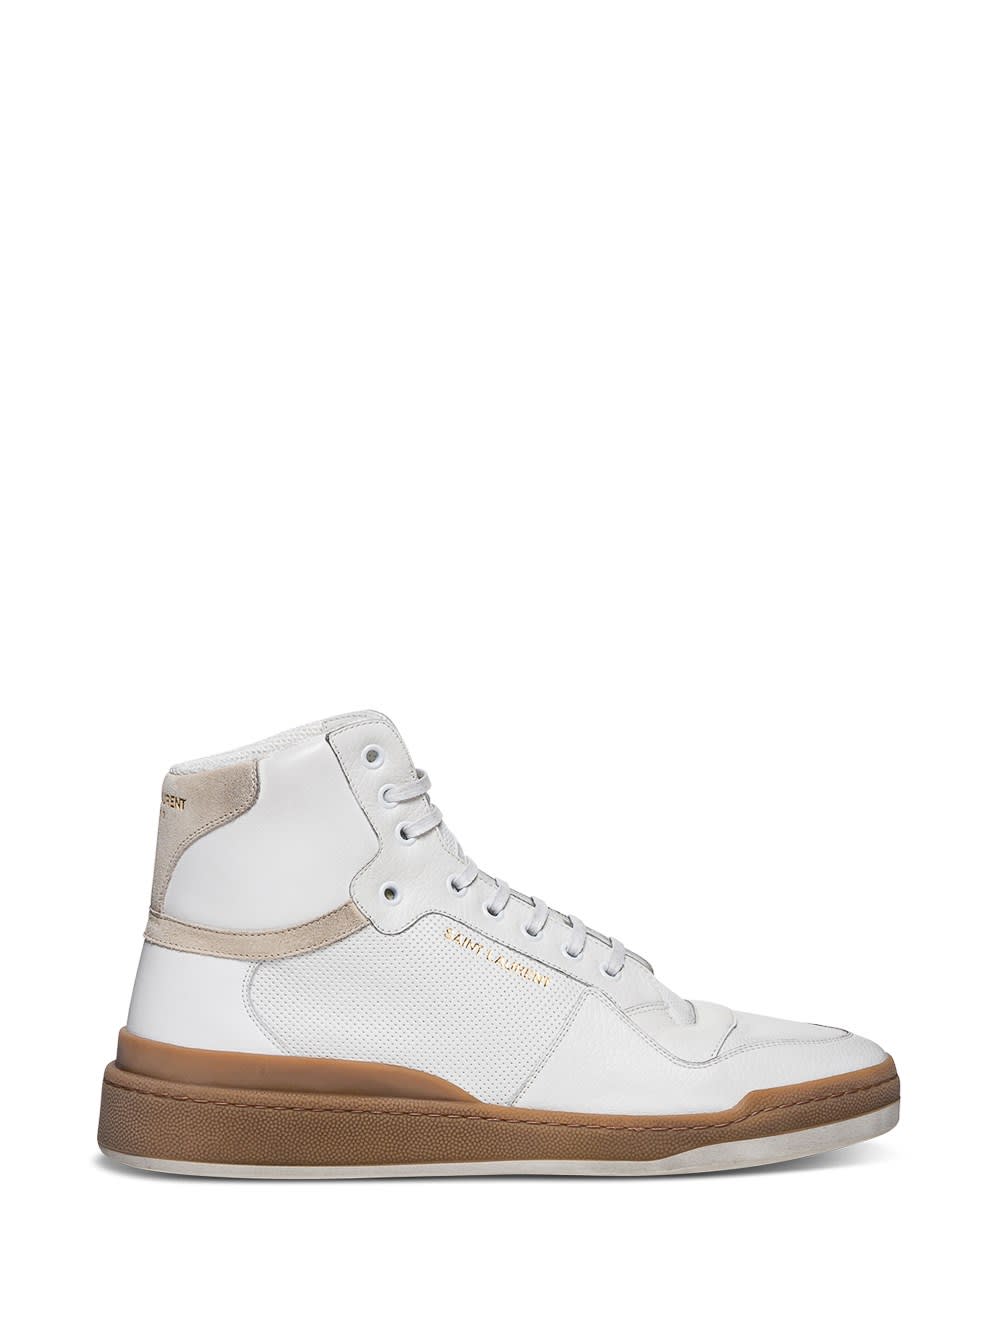 Saint Laurent Sl24 Mid-top Sneakers In Leather And Suede